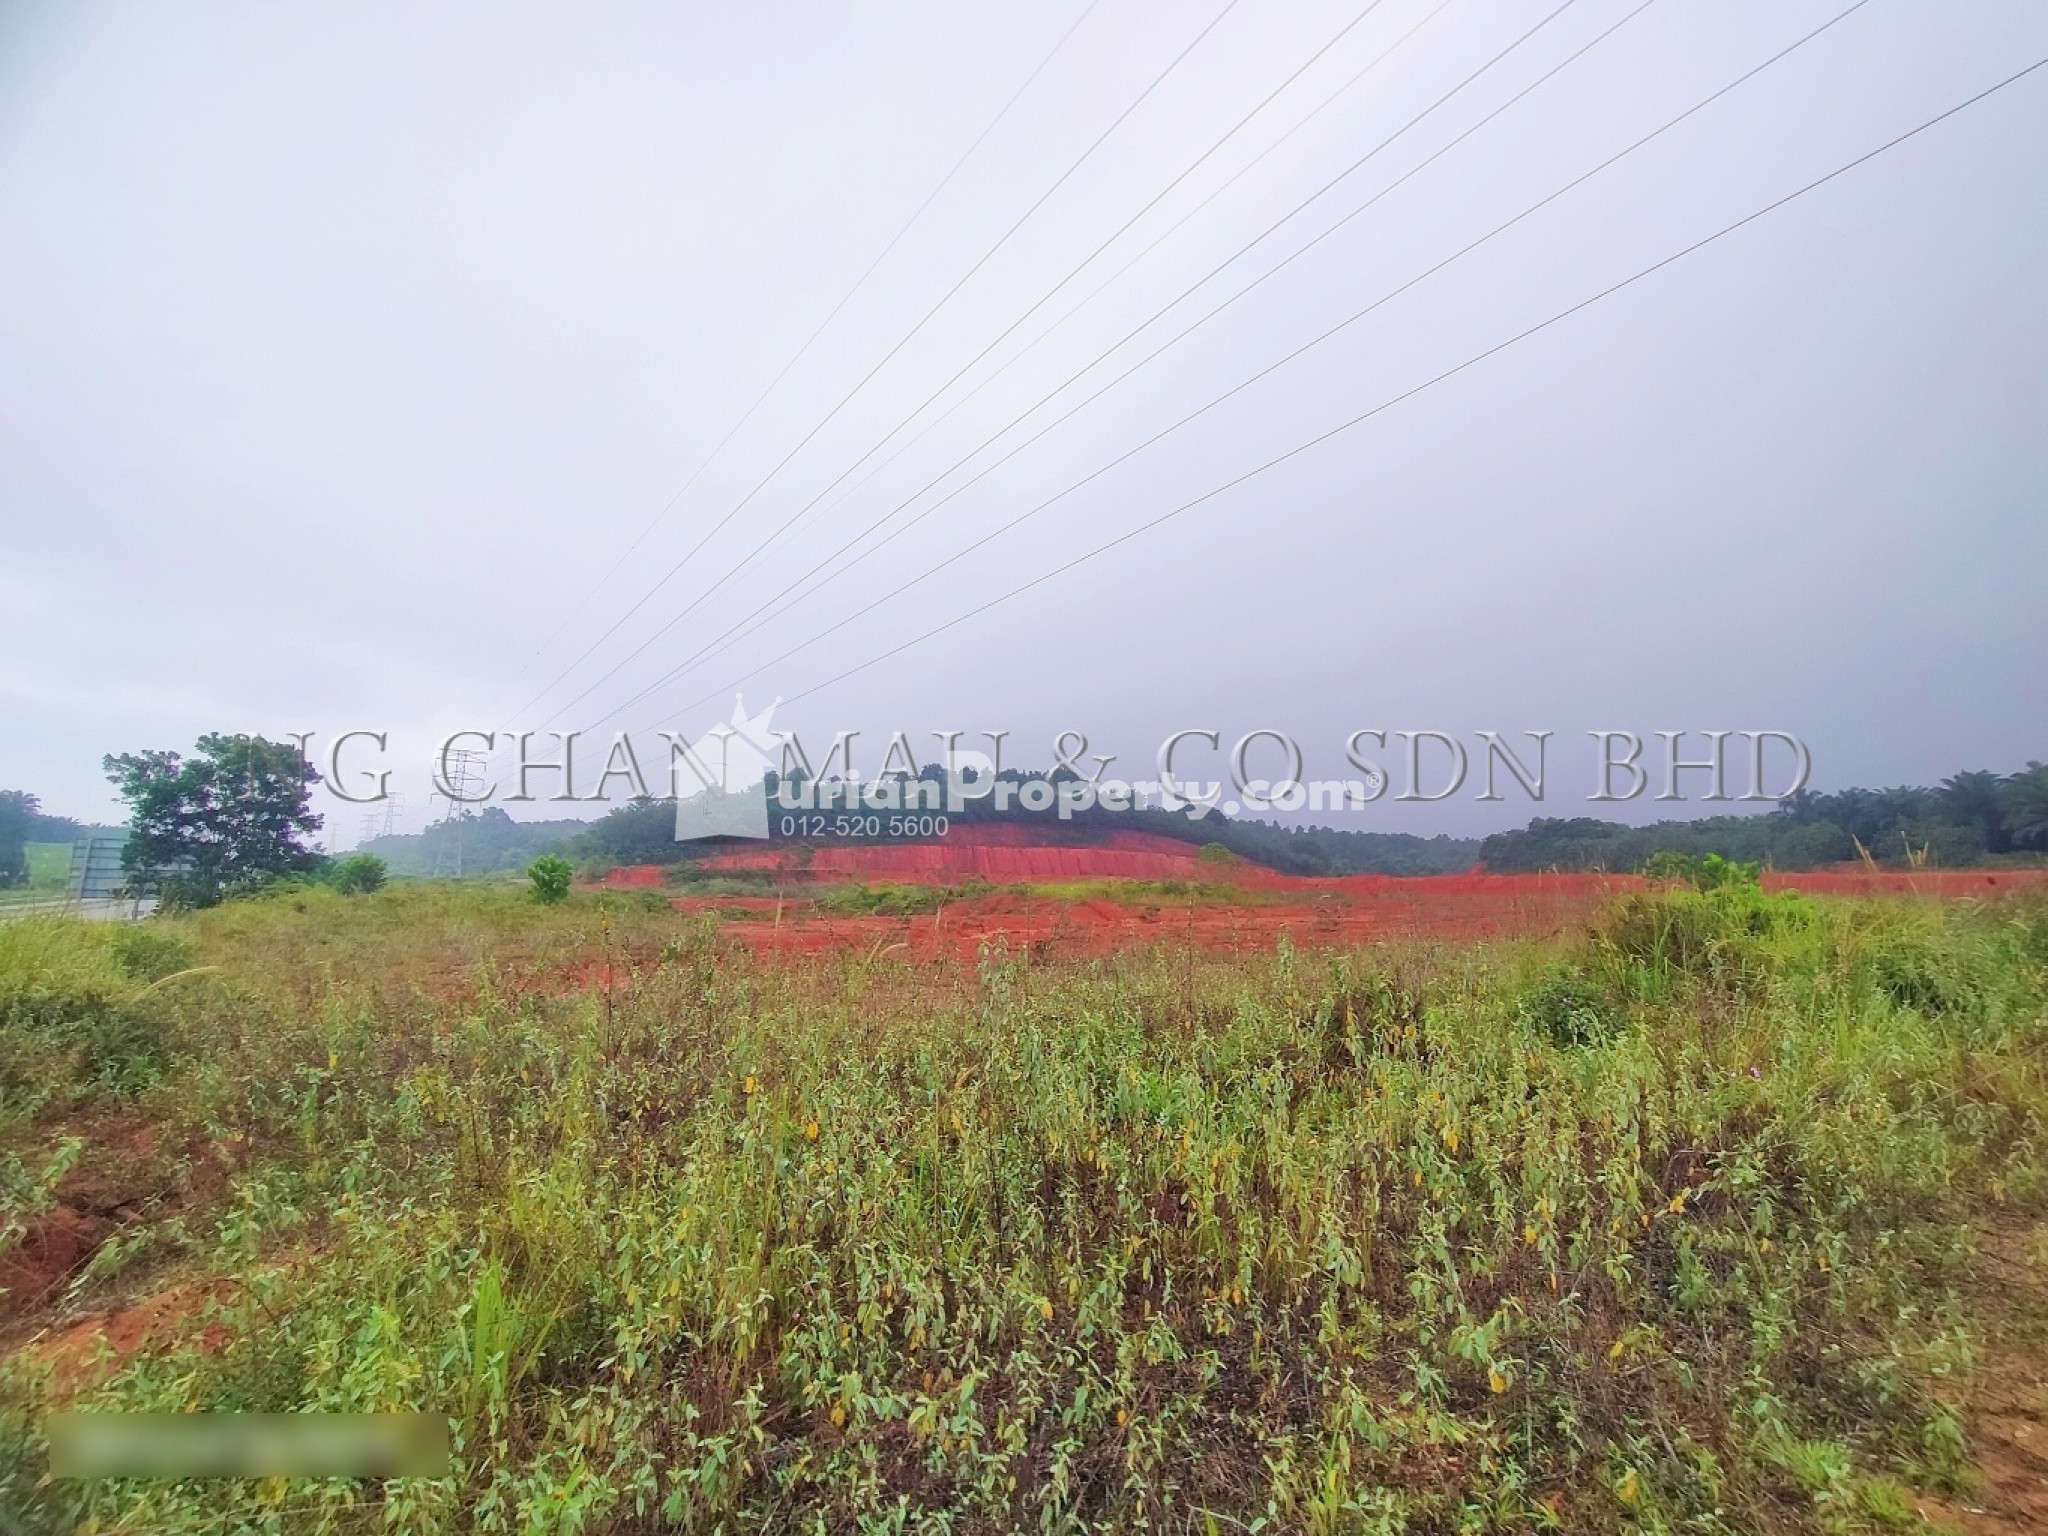 Agriculture Land For Auction at Tanjung Surat